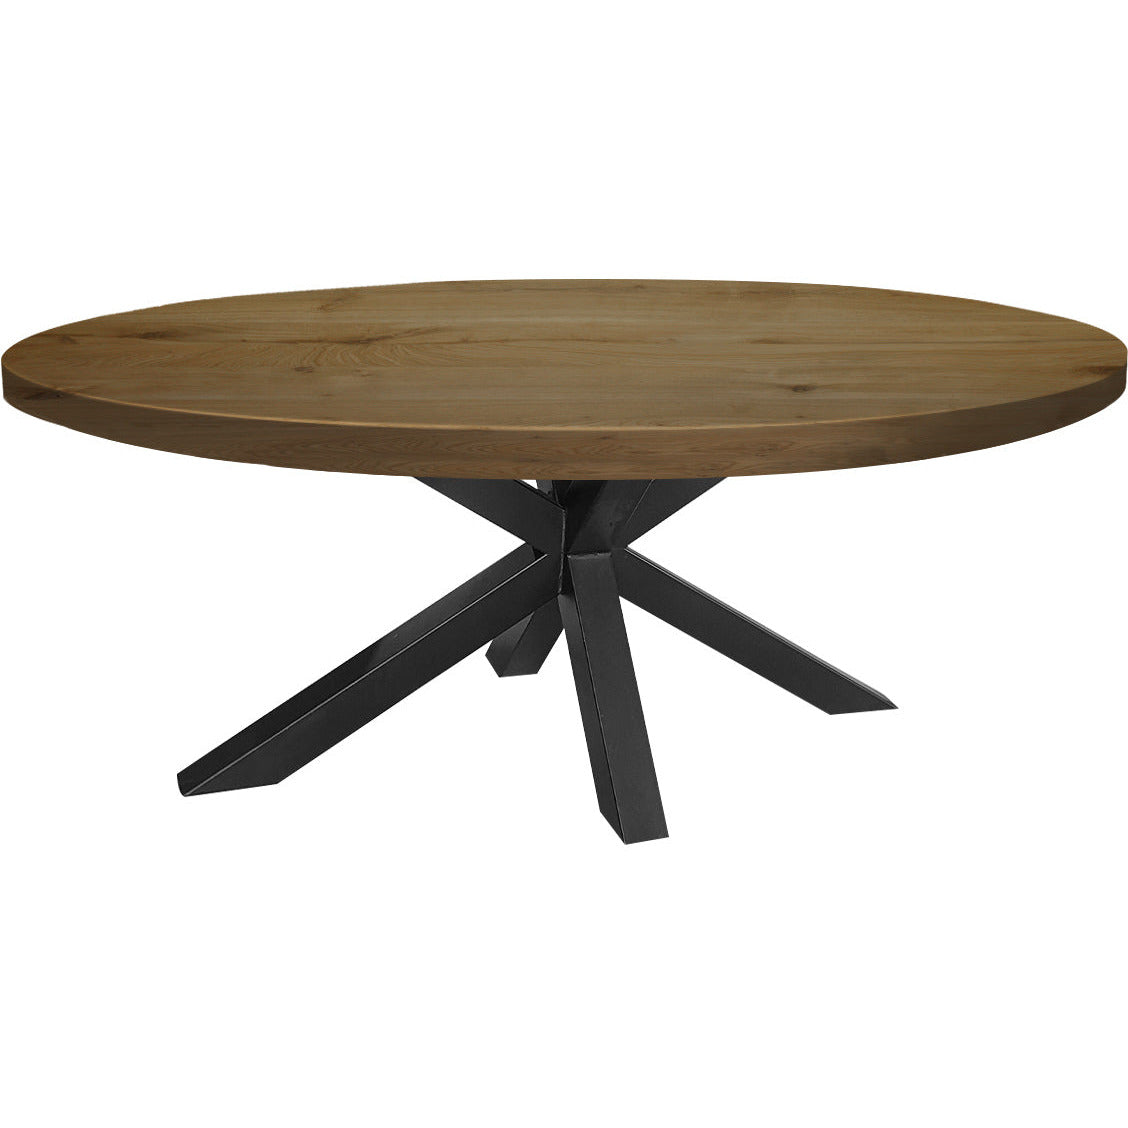 Dining table | Oval | Warm brown | Oak wood | Lacquered | Spiderpaw